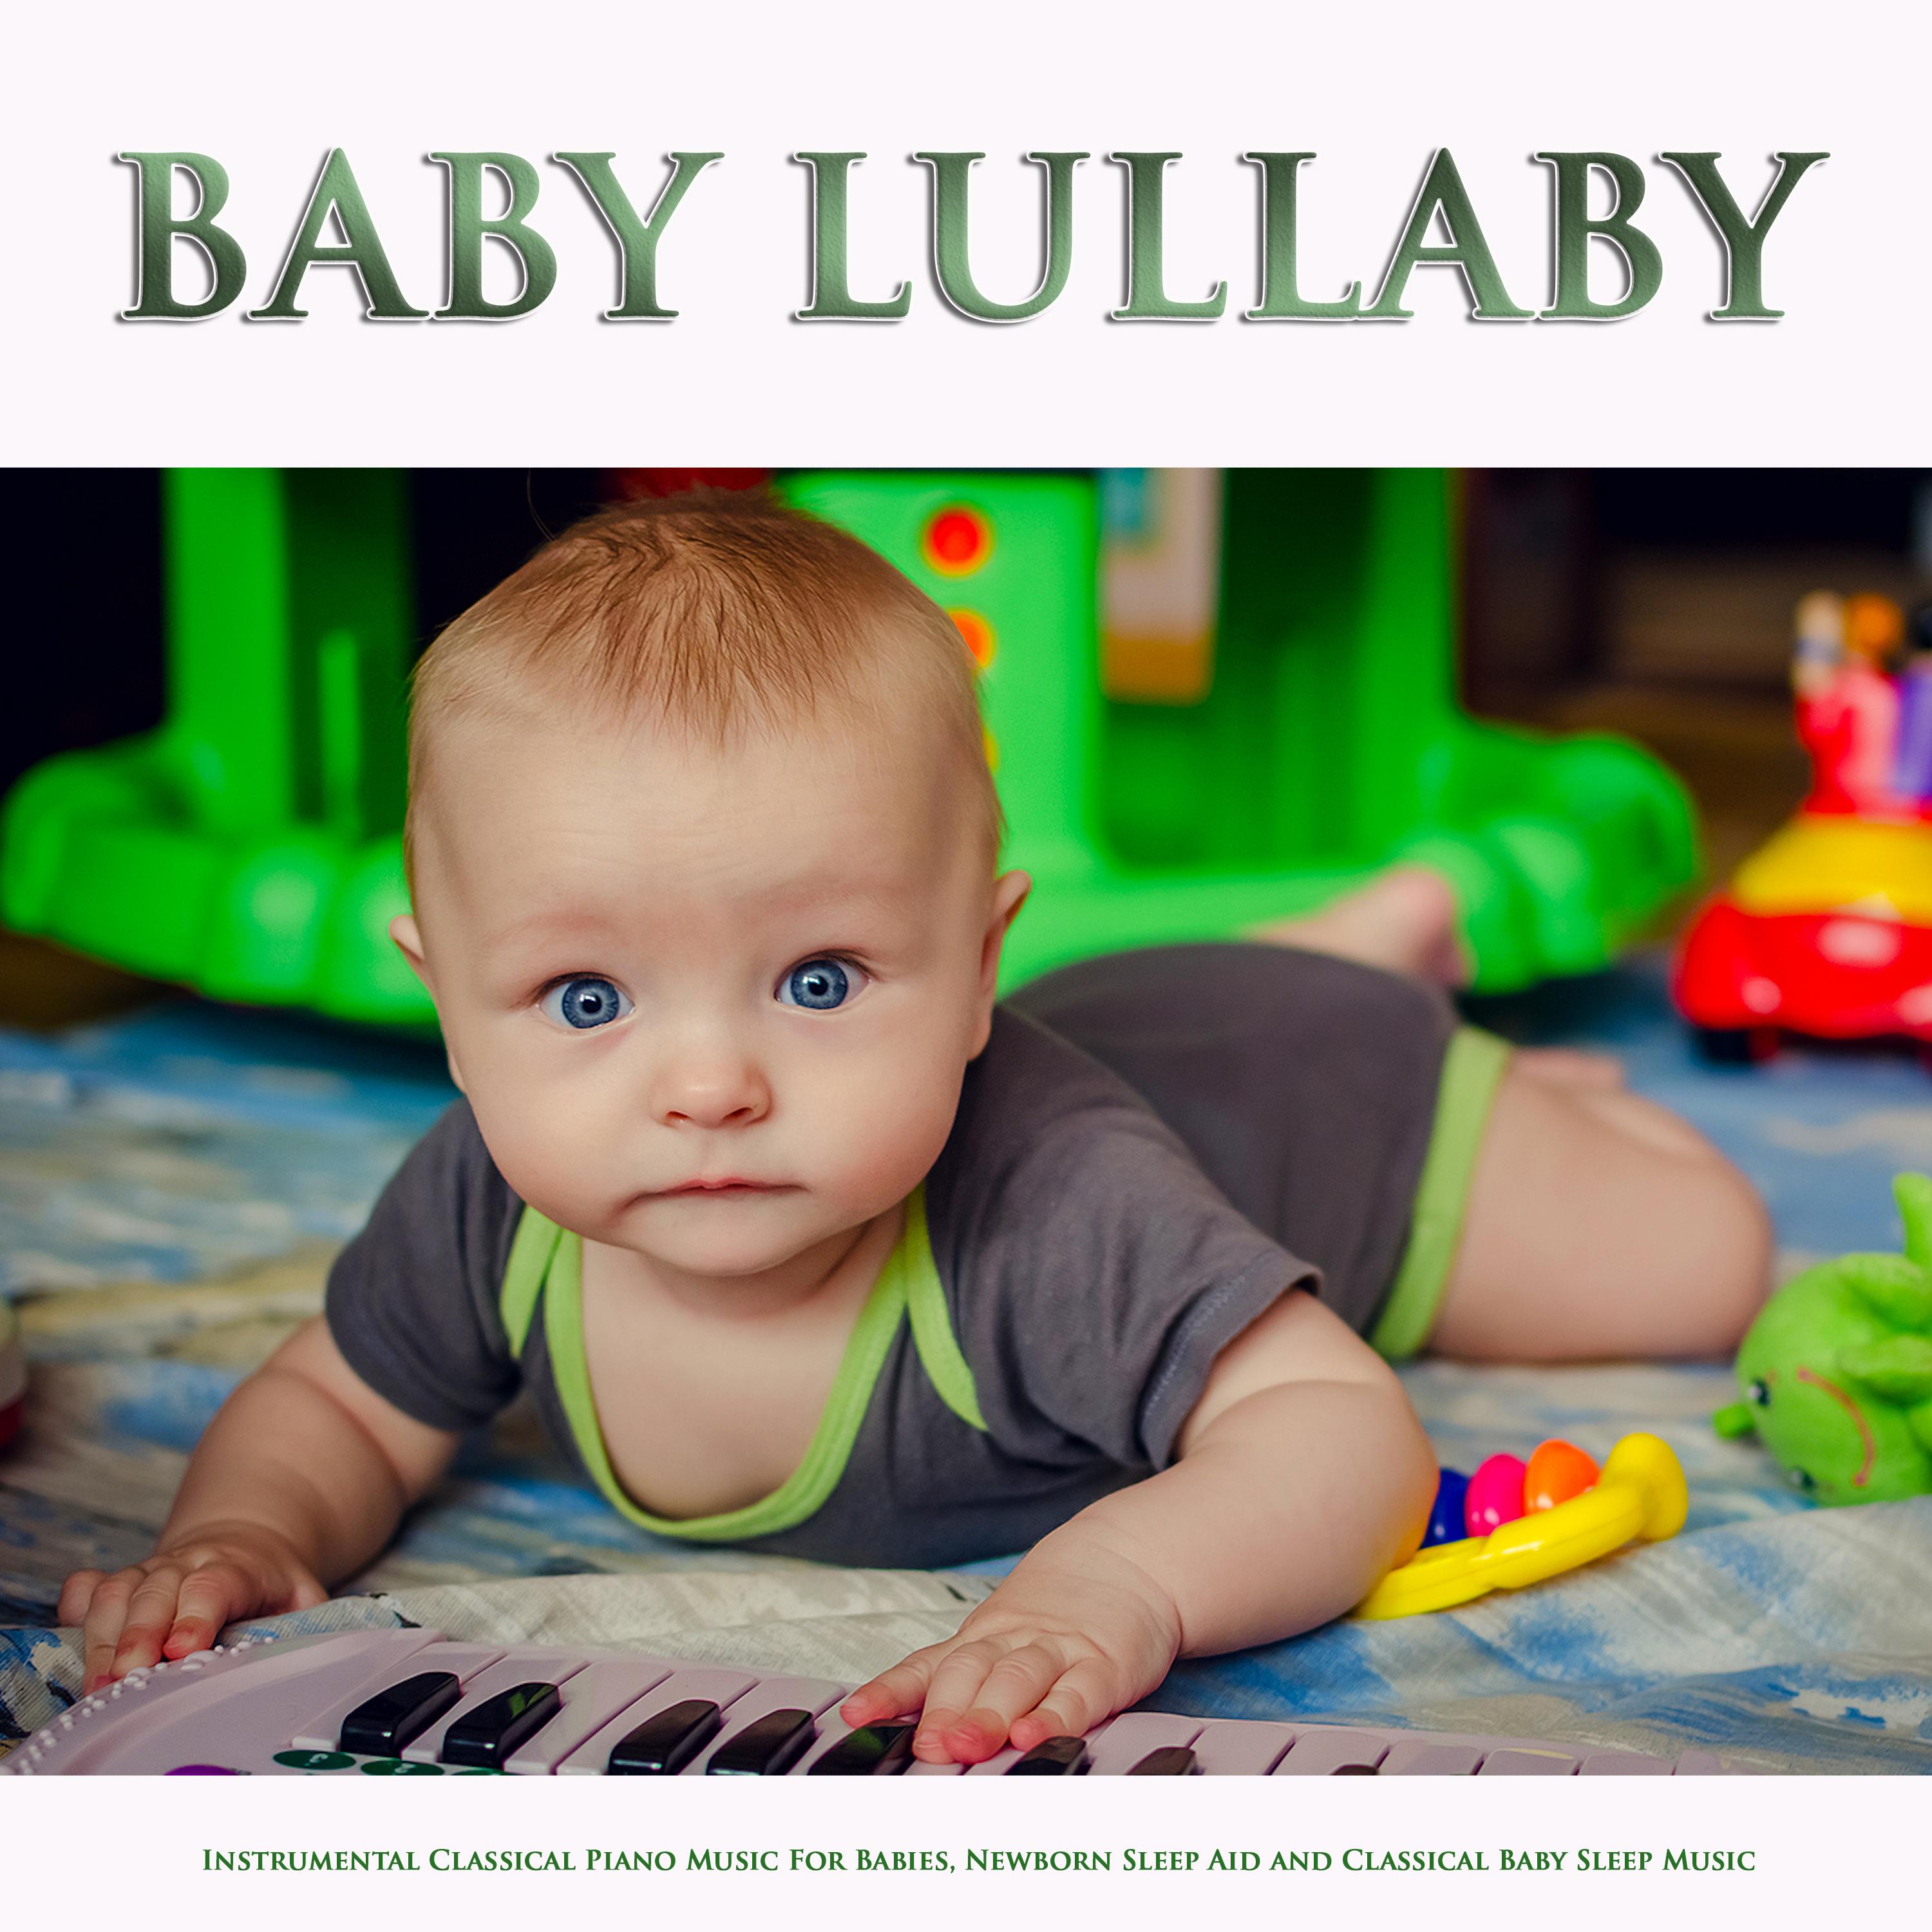 Baby Lullaby: Instrumental Classical Piano Music For Babies, Newborn Sleep Aid and Classical Baby Sleep Music